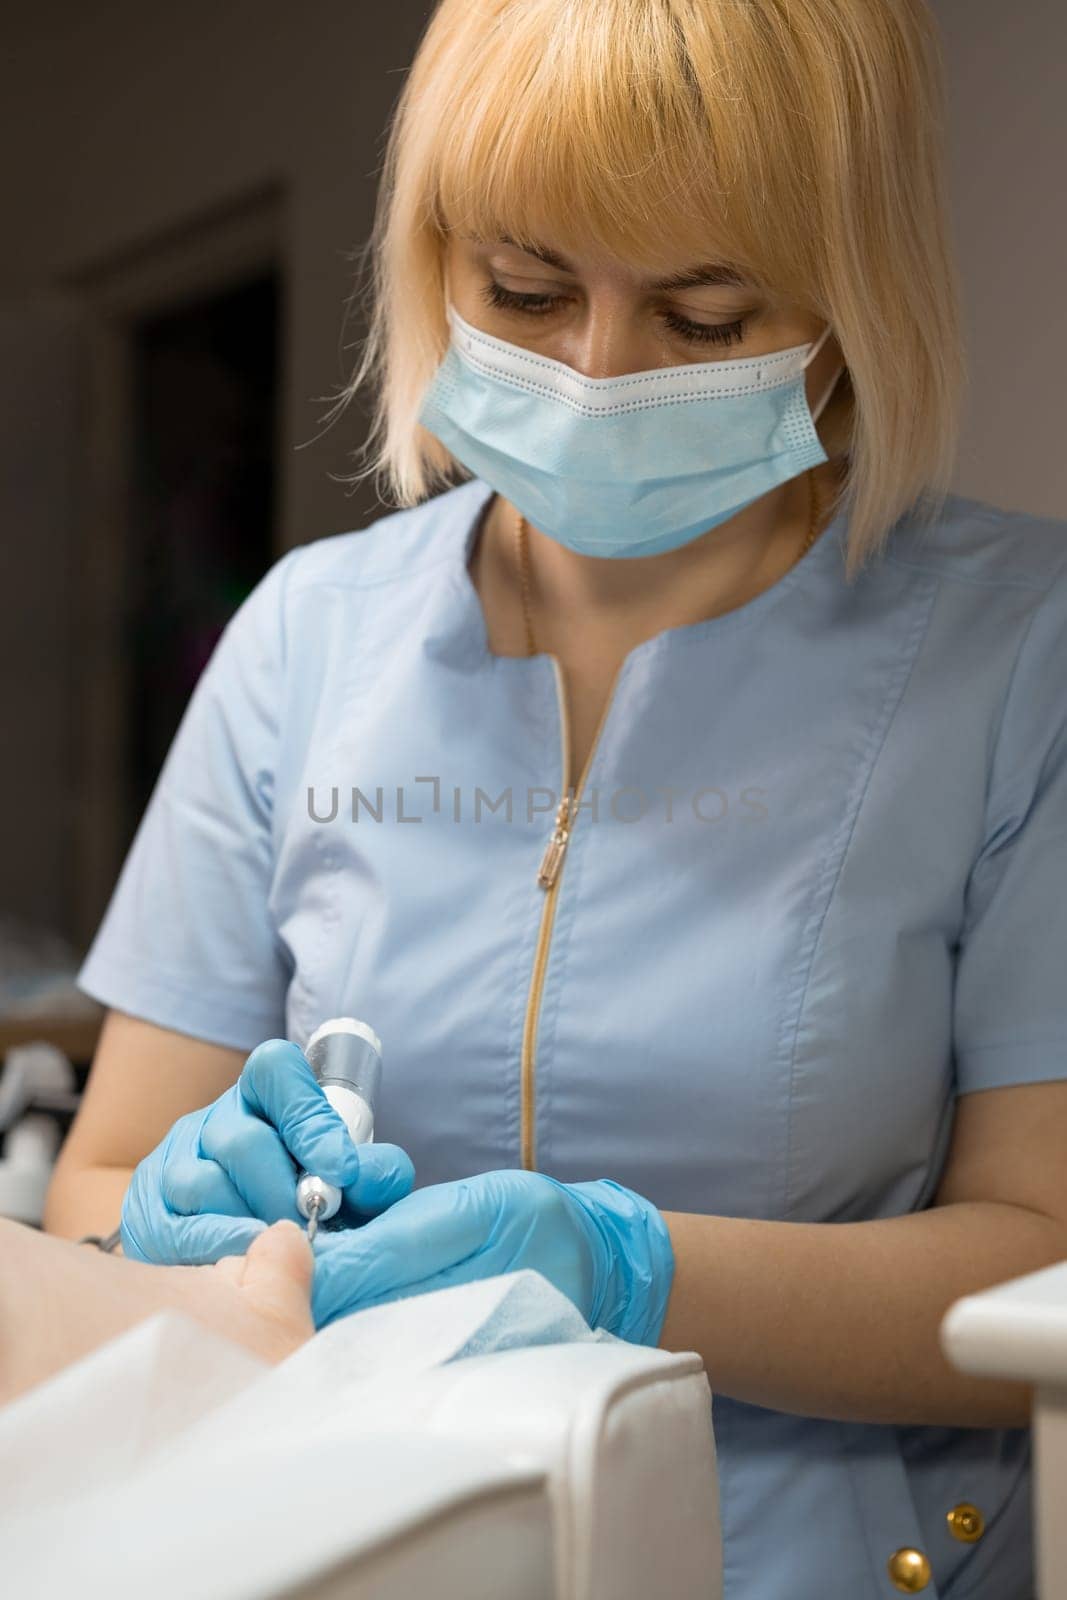 Podologist in face mask during the process of removing an ingrown toenail by vladimka